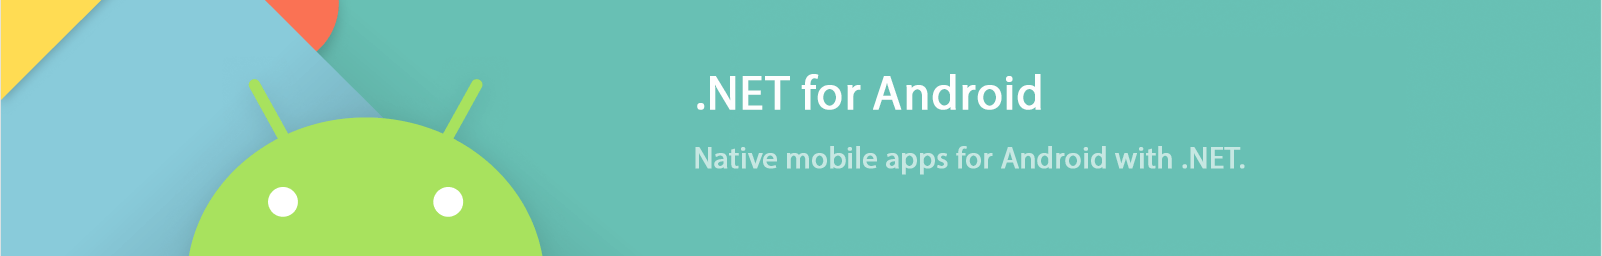 .NET for Android banner